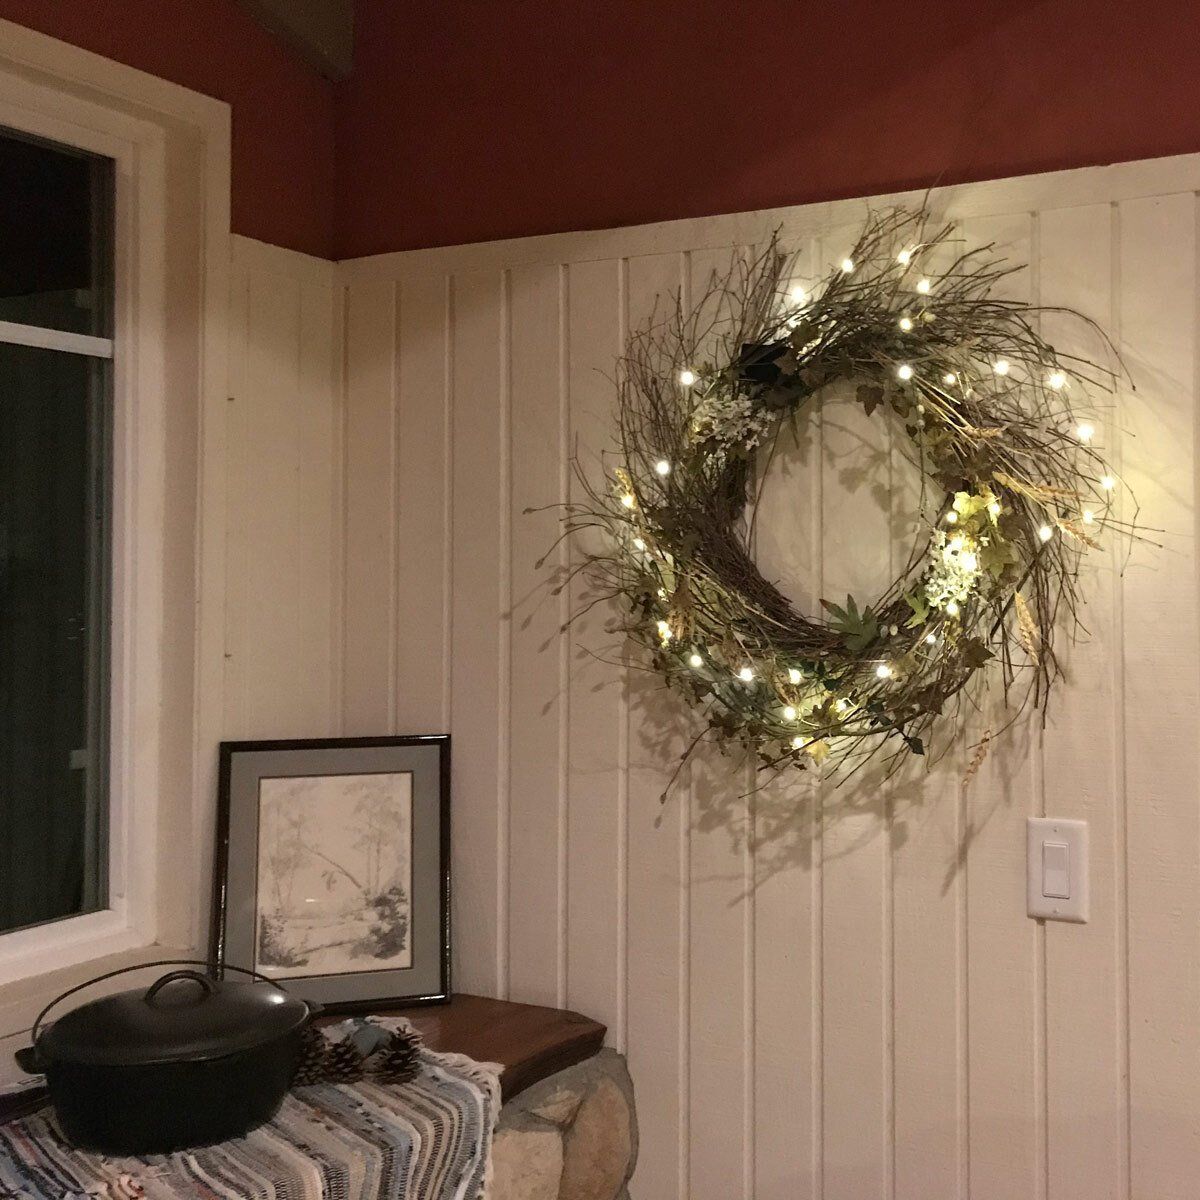 Twinkle lights in Christmas wreath hanging on wall